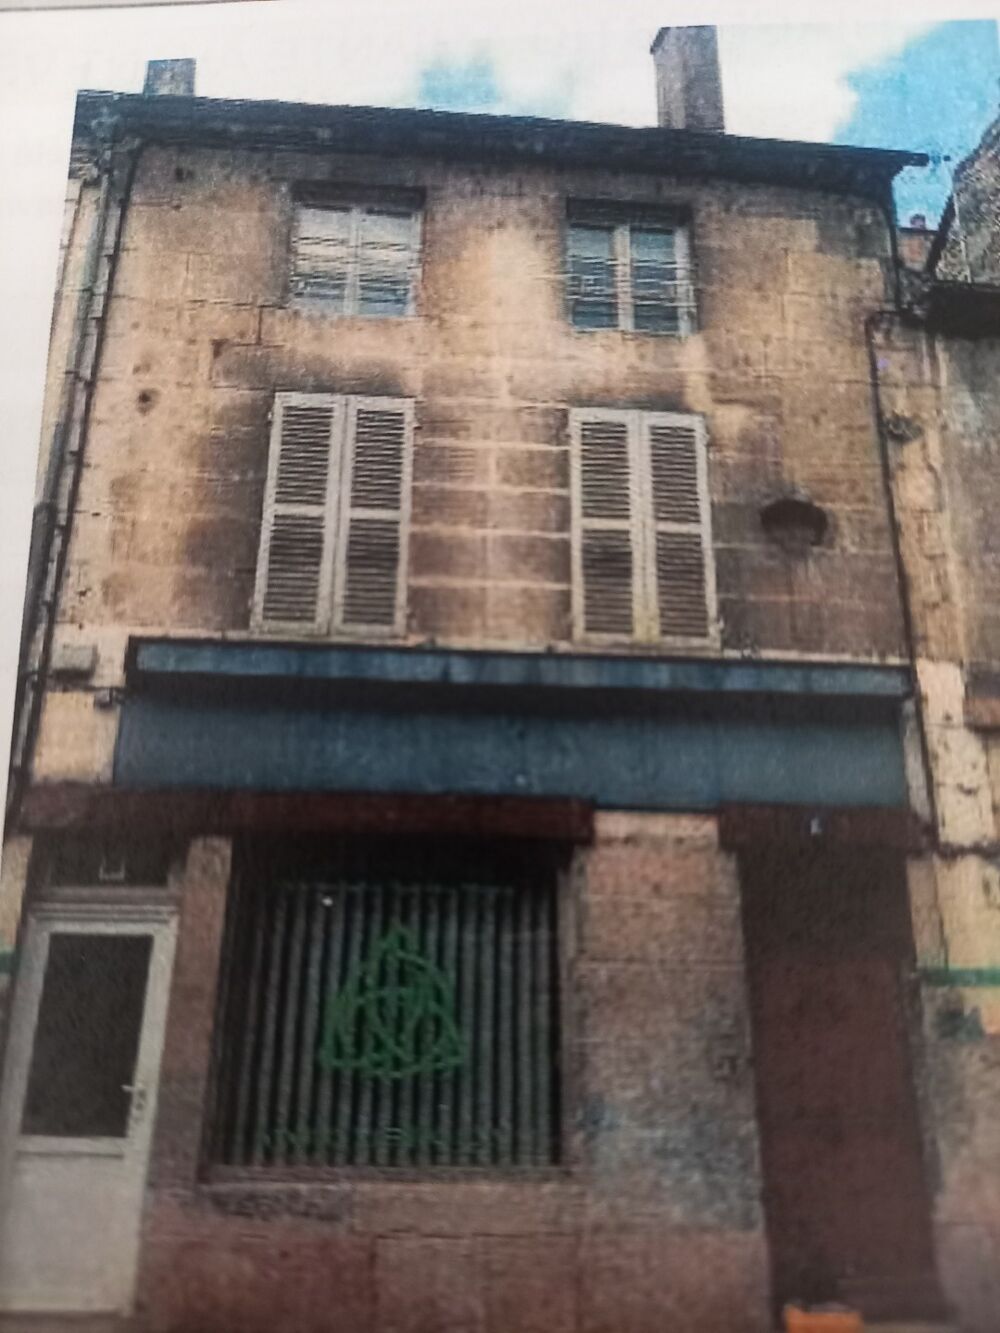 Vente Immeuble INVESTISSEURS 6 Appartements 1 local commercial Montbard